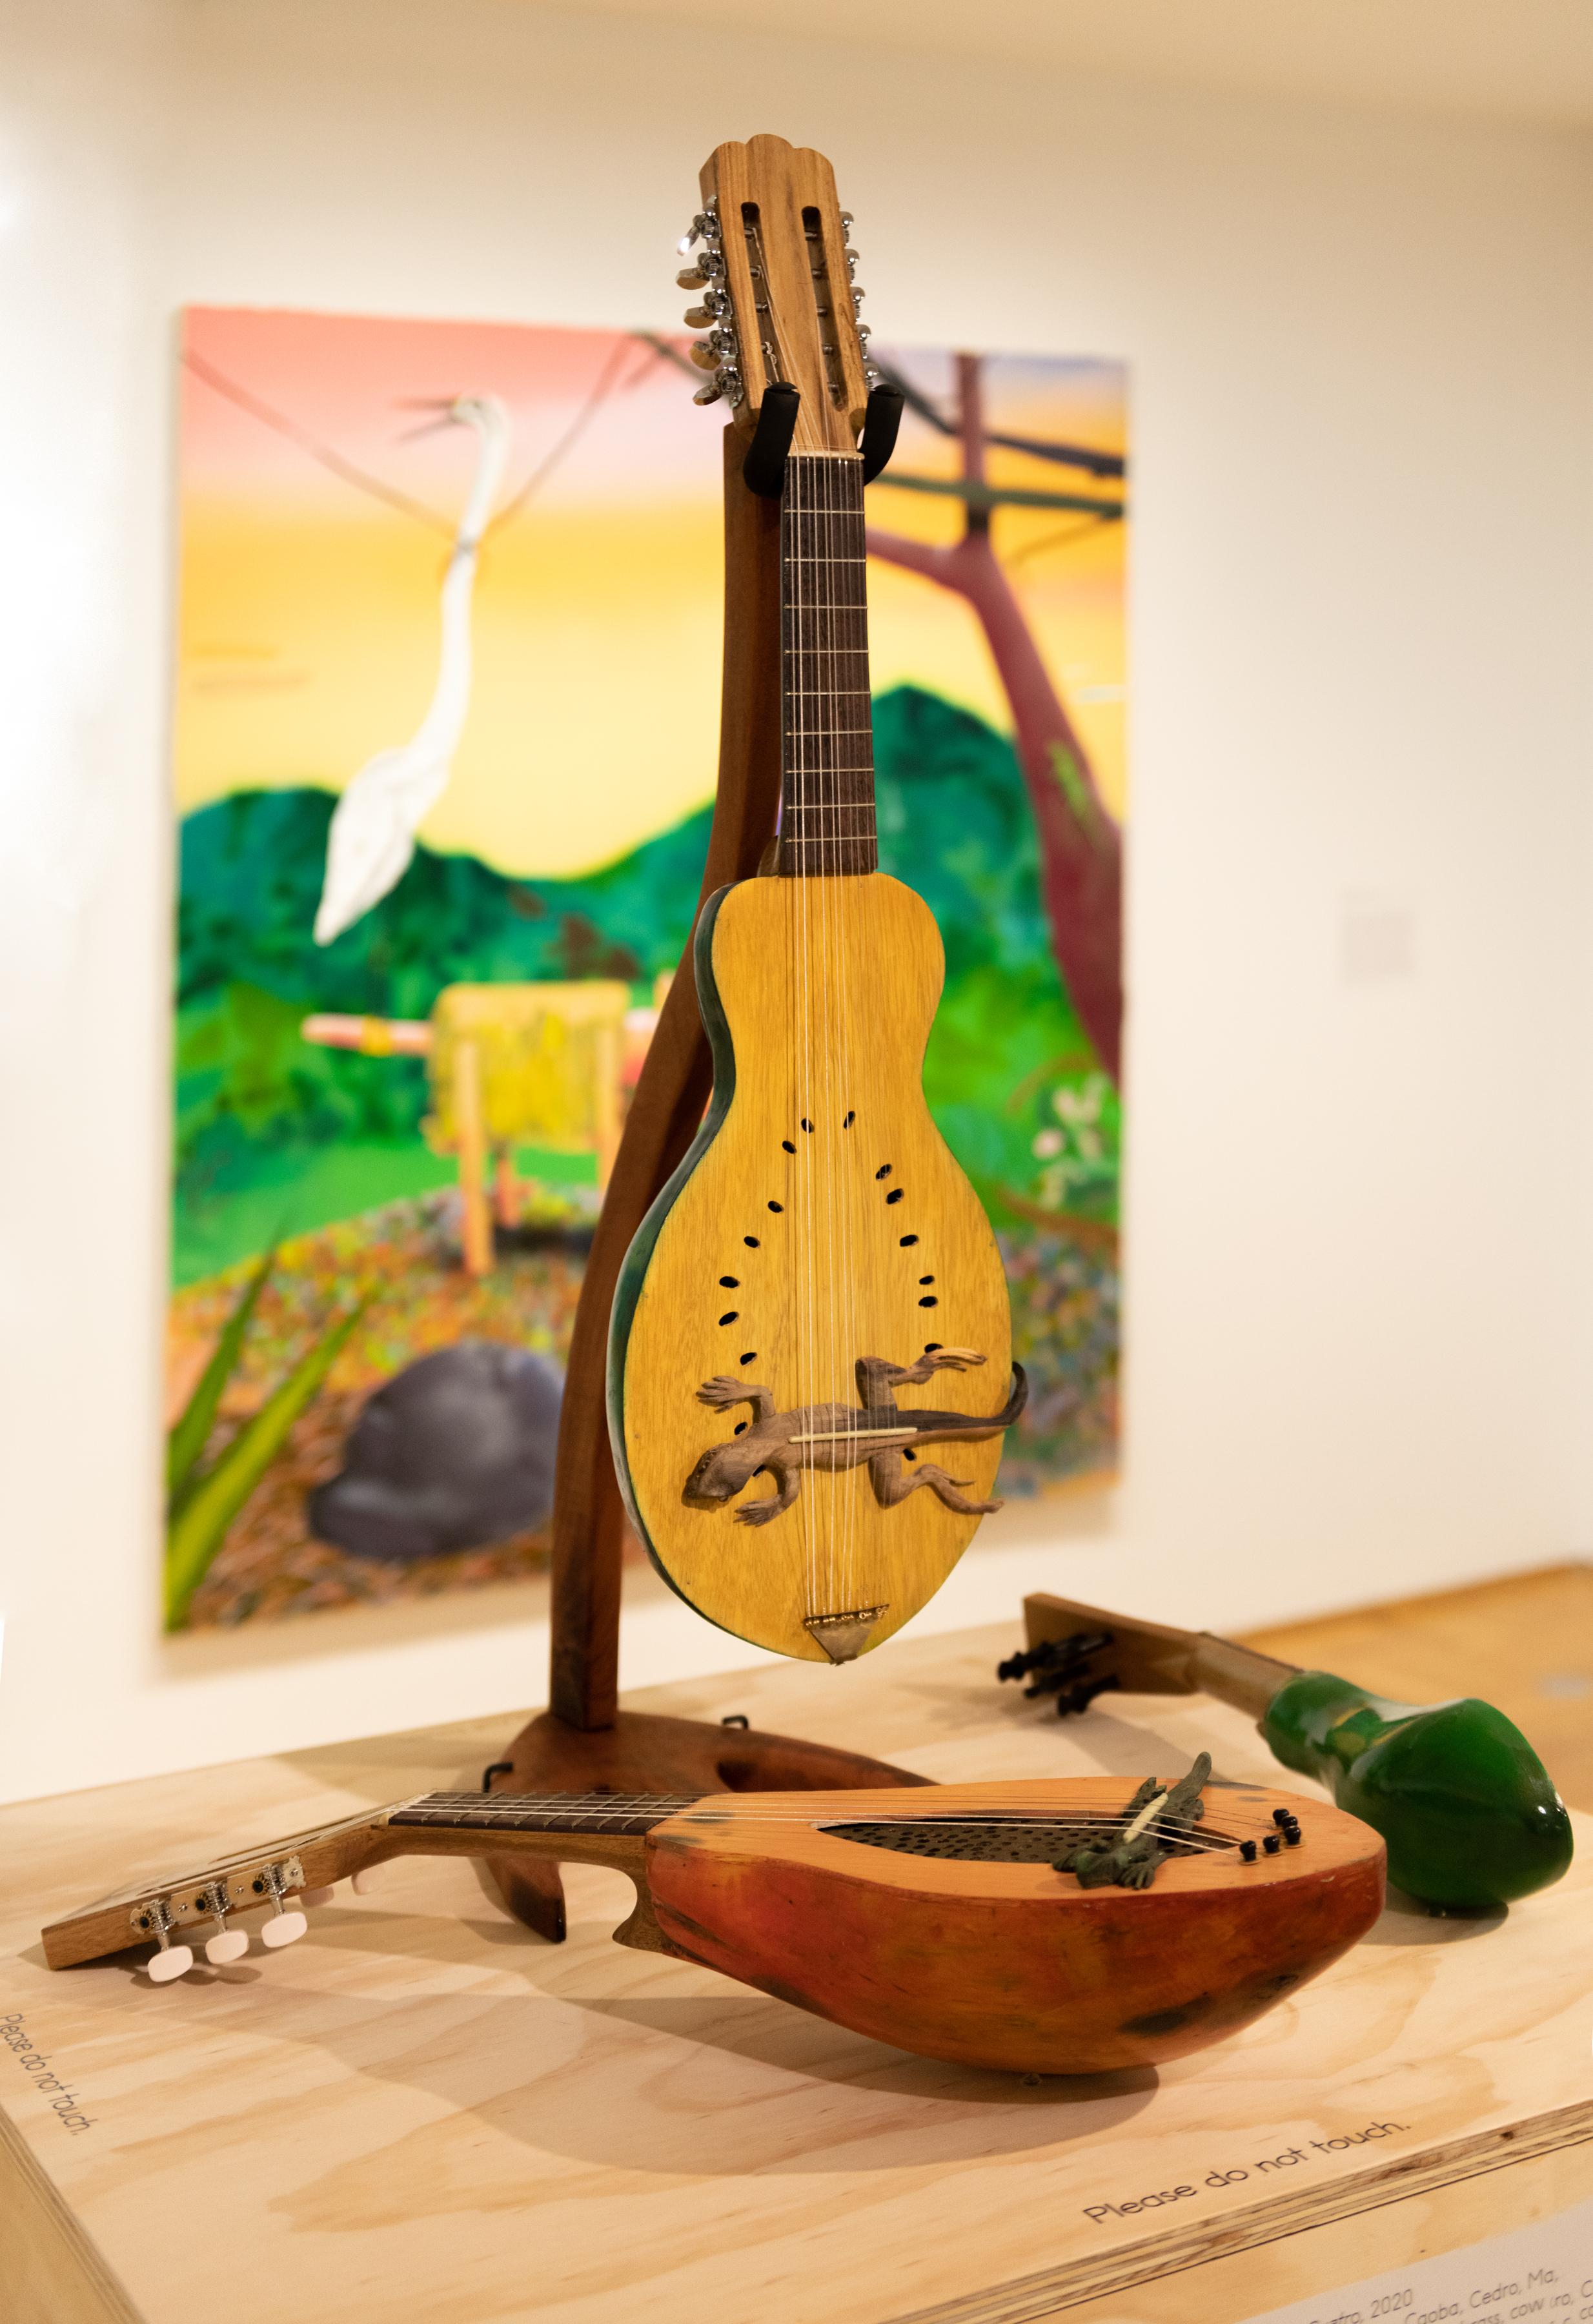 Handmade string instruments on a table